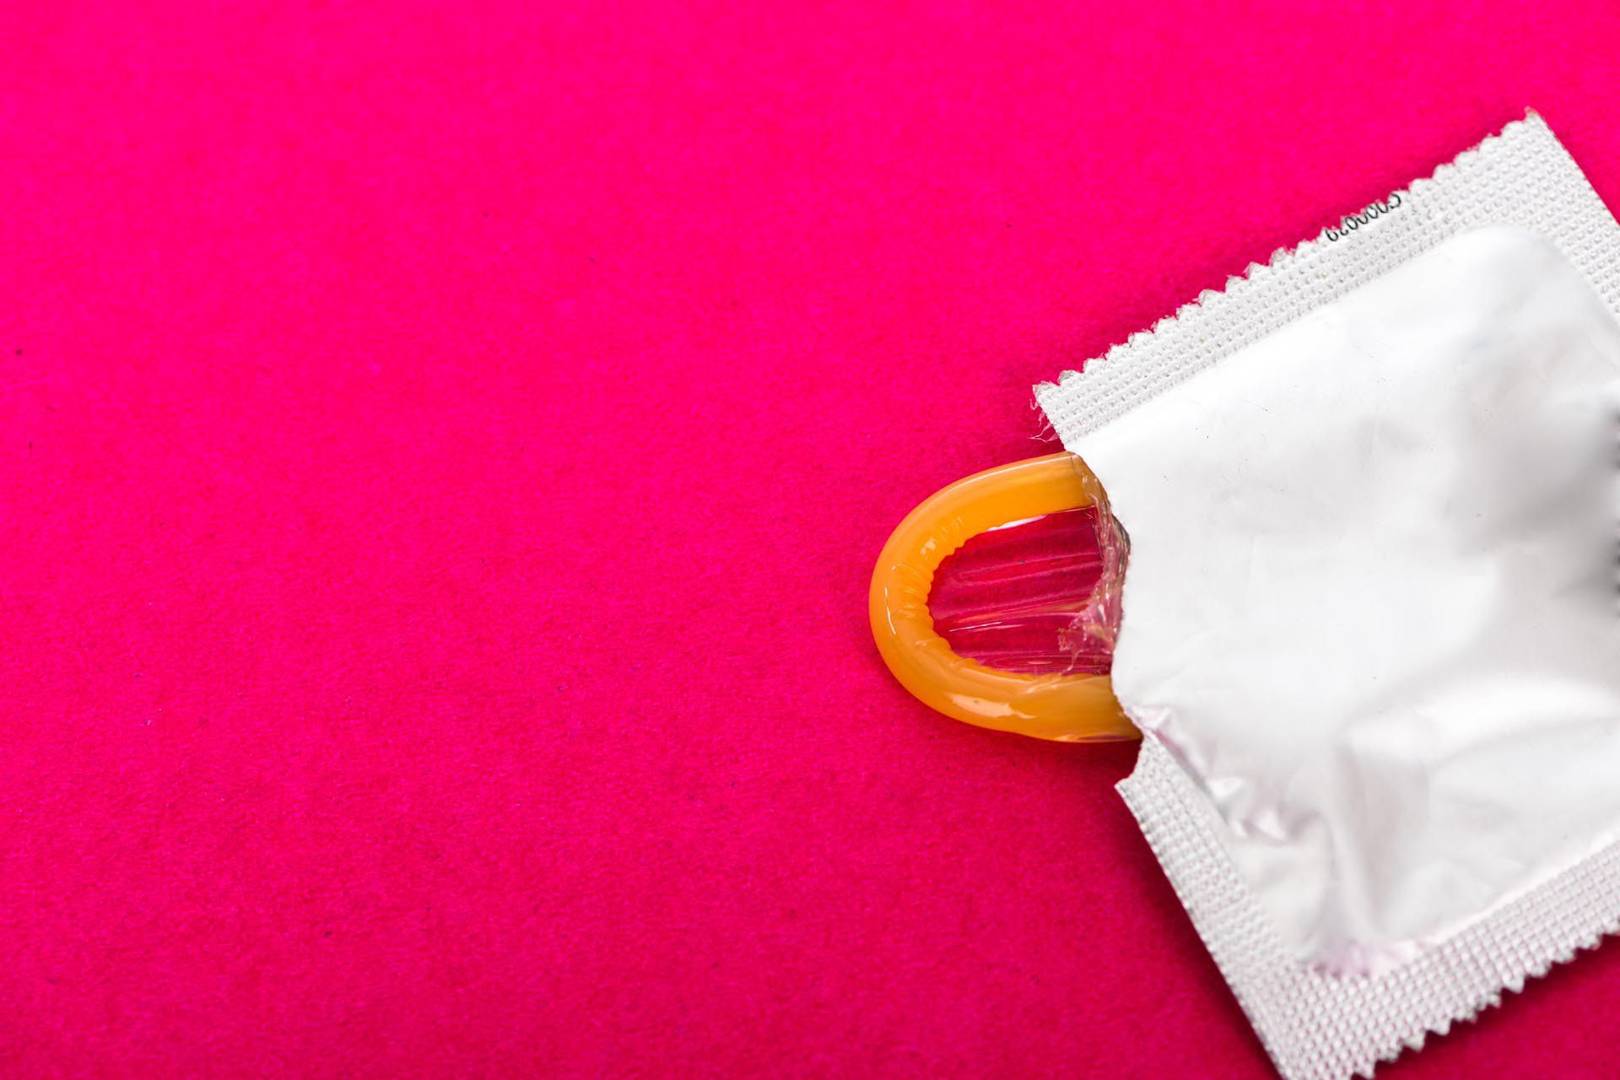 1620px x 1080px - Where's Johnny? Porn studio digitally removes condoms | WIRED UK